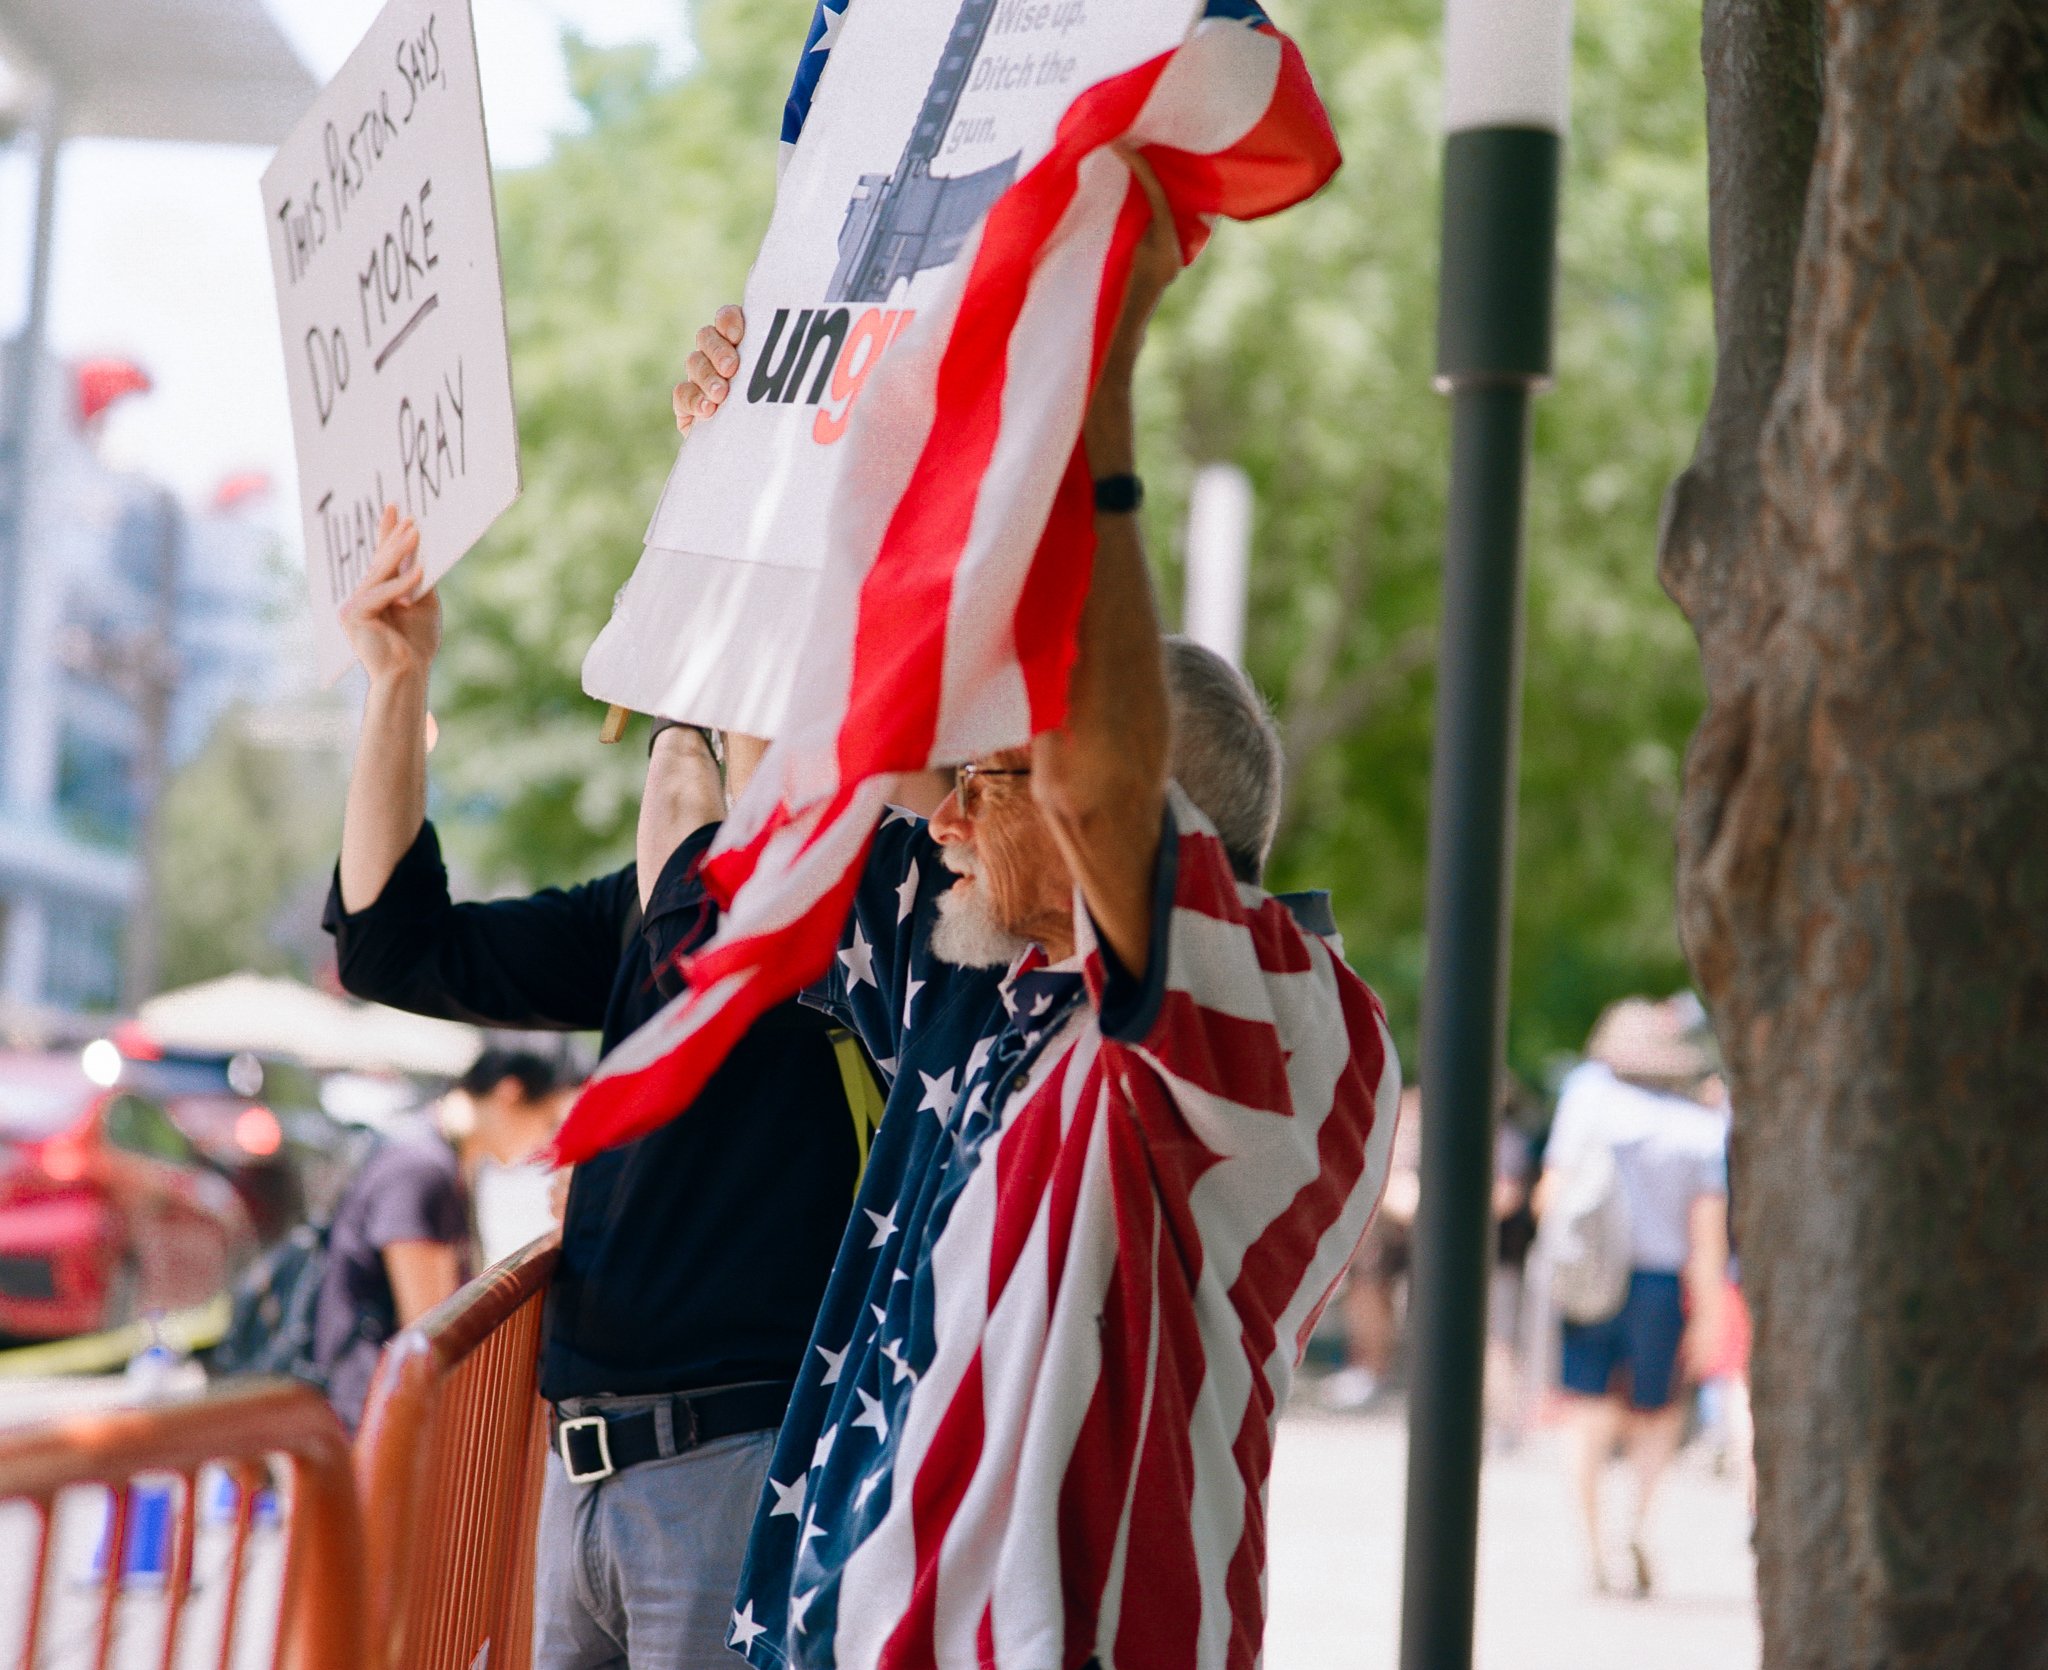 The beauty of resistance at the NRA protests in Houston